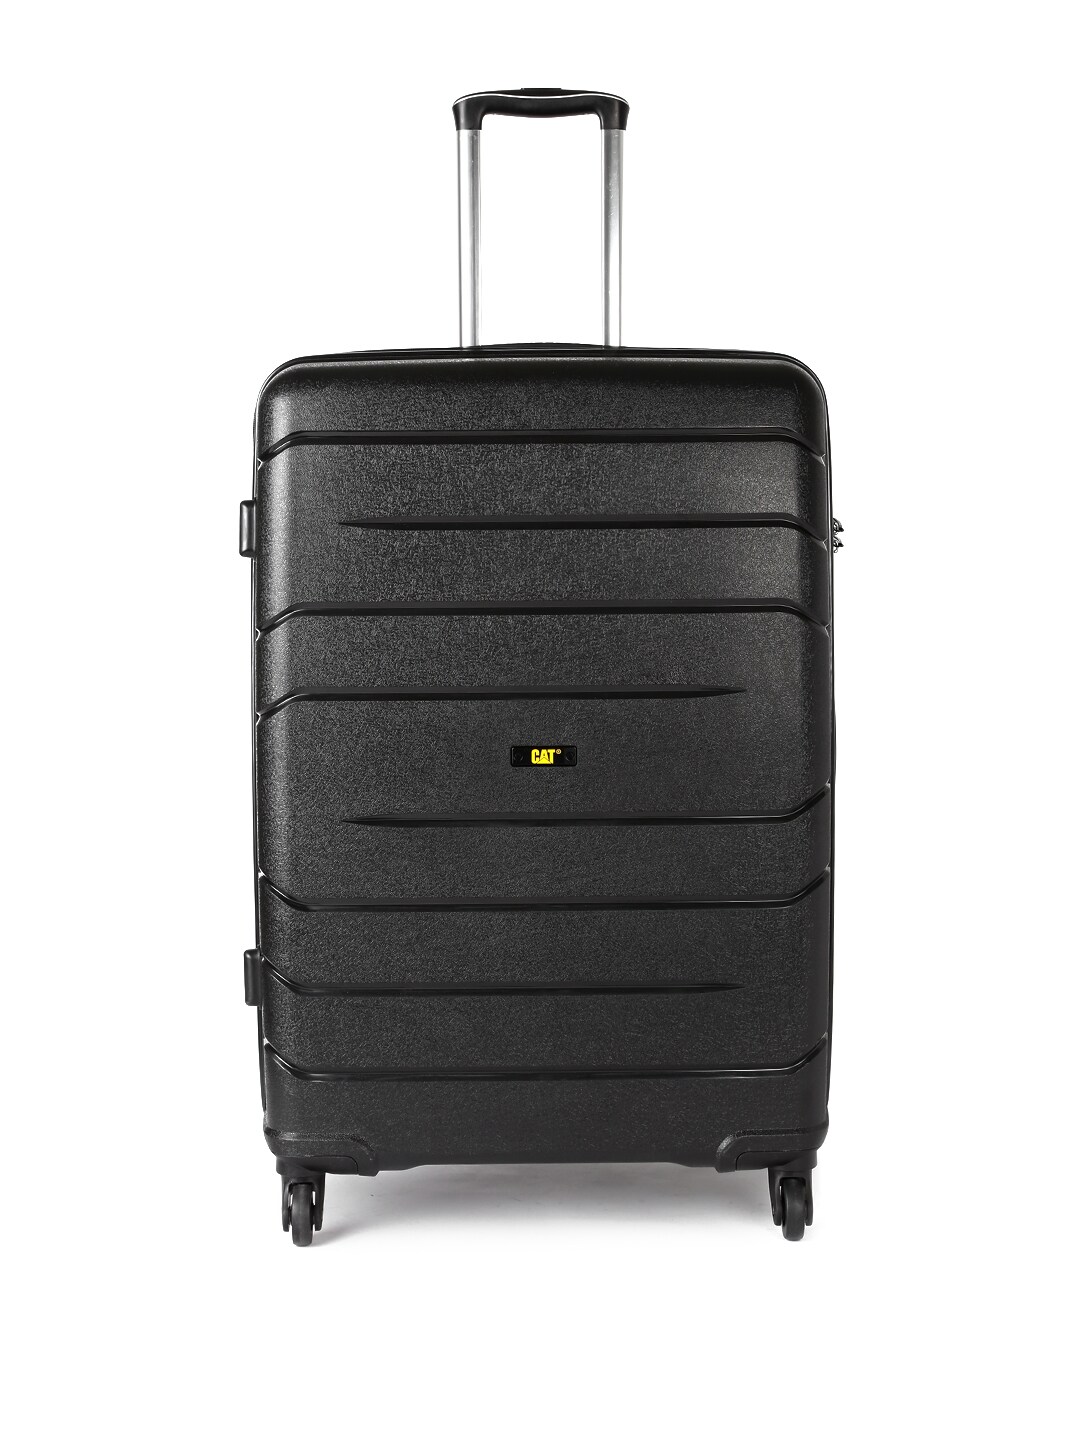 CAT Black Cargo Crosscheck 24" Checkin & Hardsided Medium Trolley Suitcase Price in India